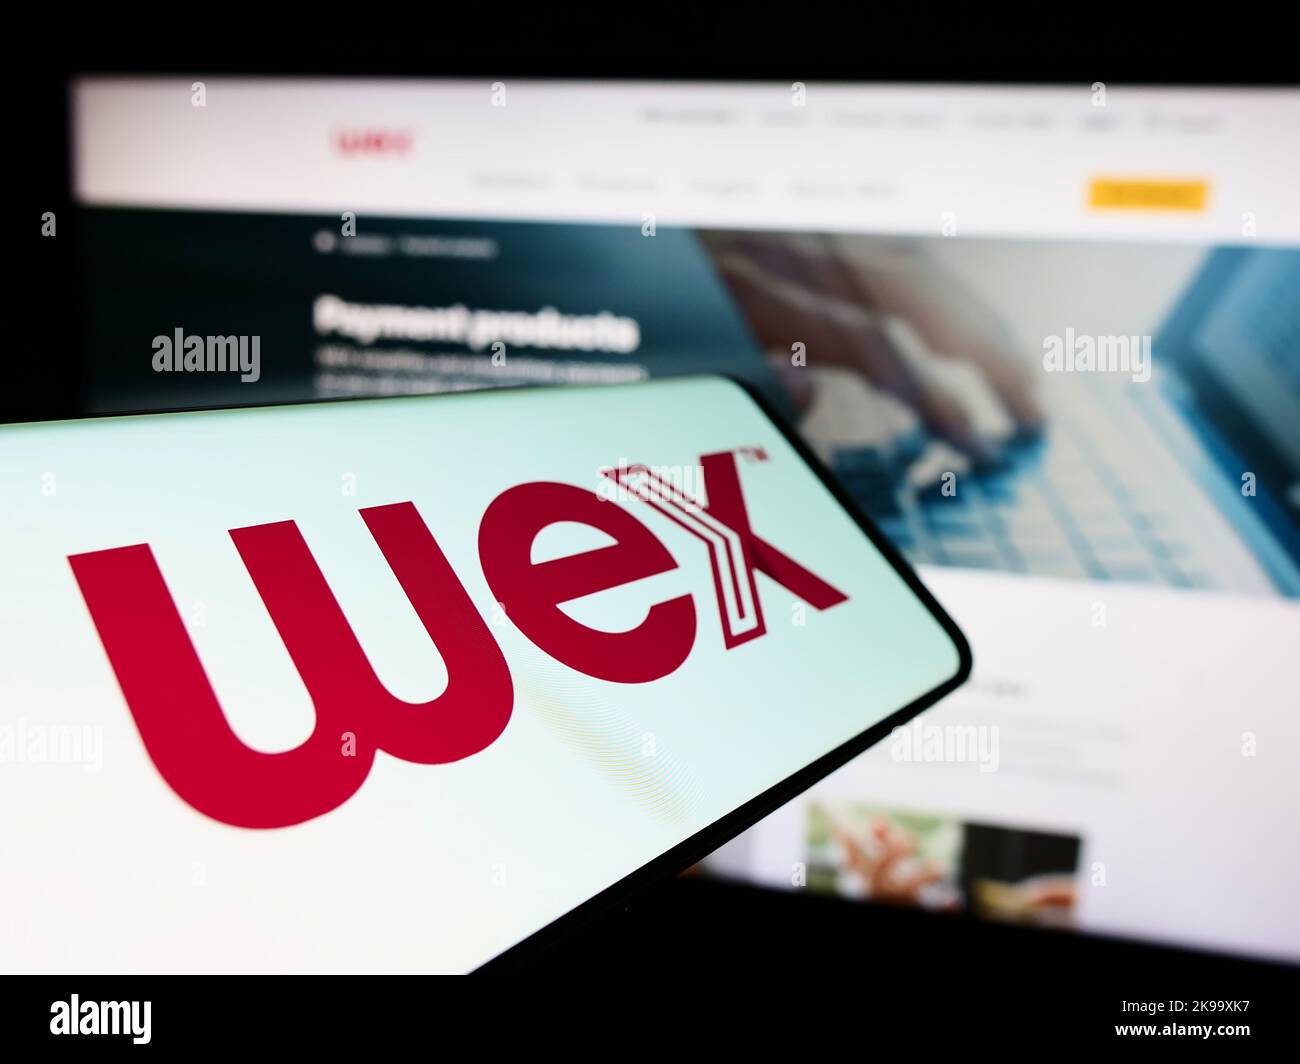 Smartphone with logo of American payment processing company WEX Inc. on screen in front of business website. Focus on center of phone display. Stock Photo